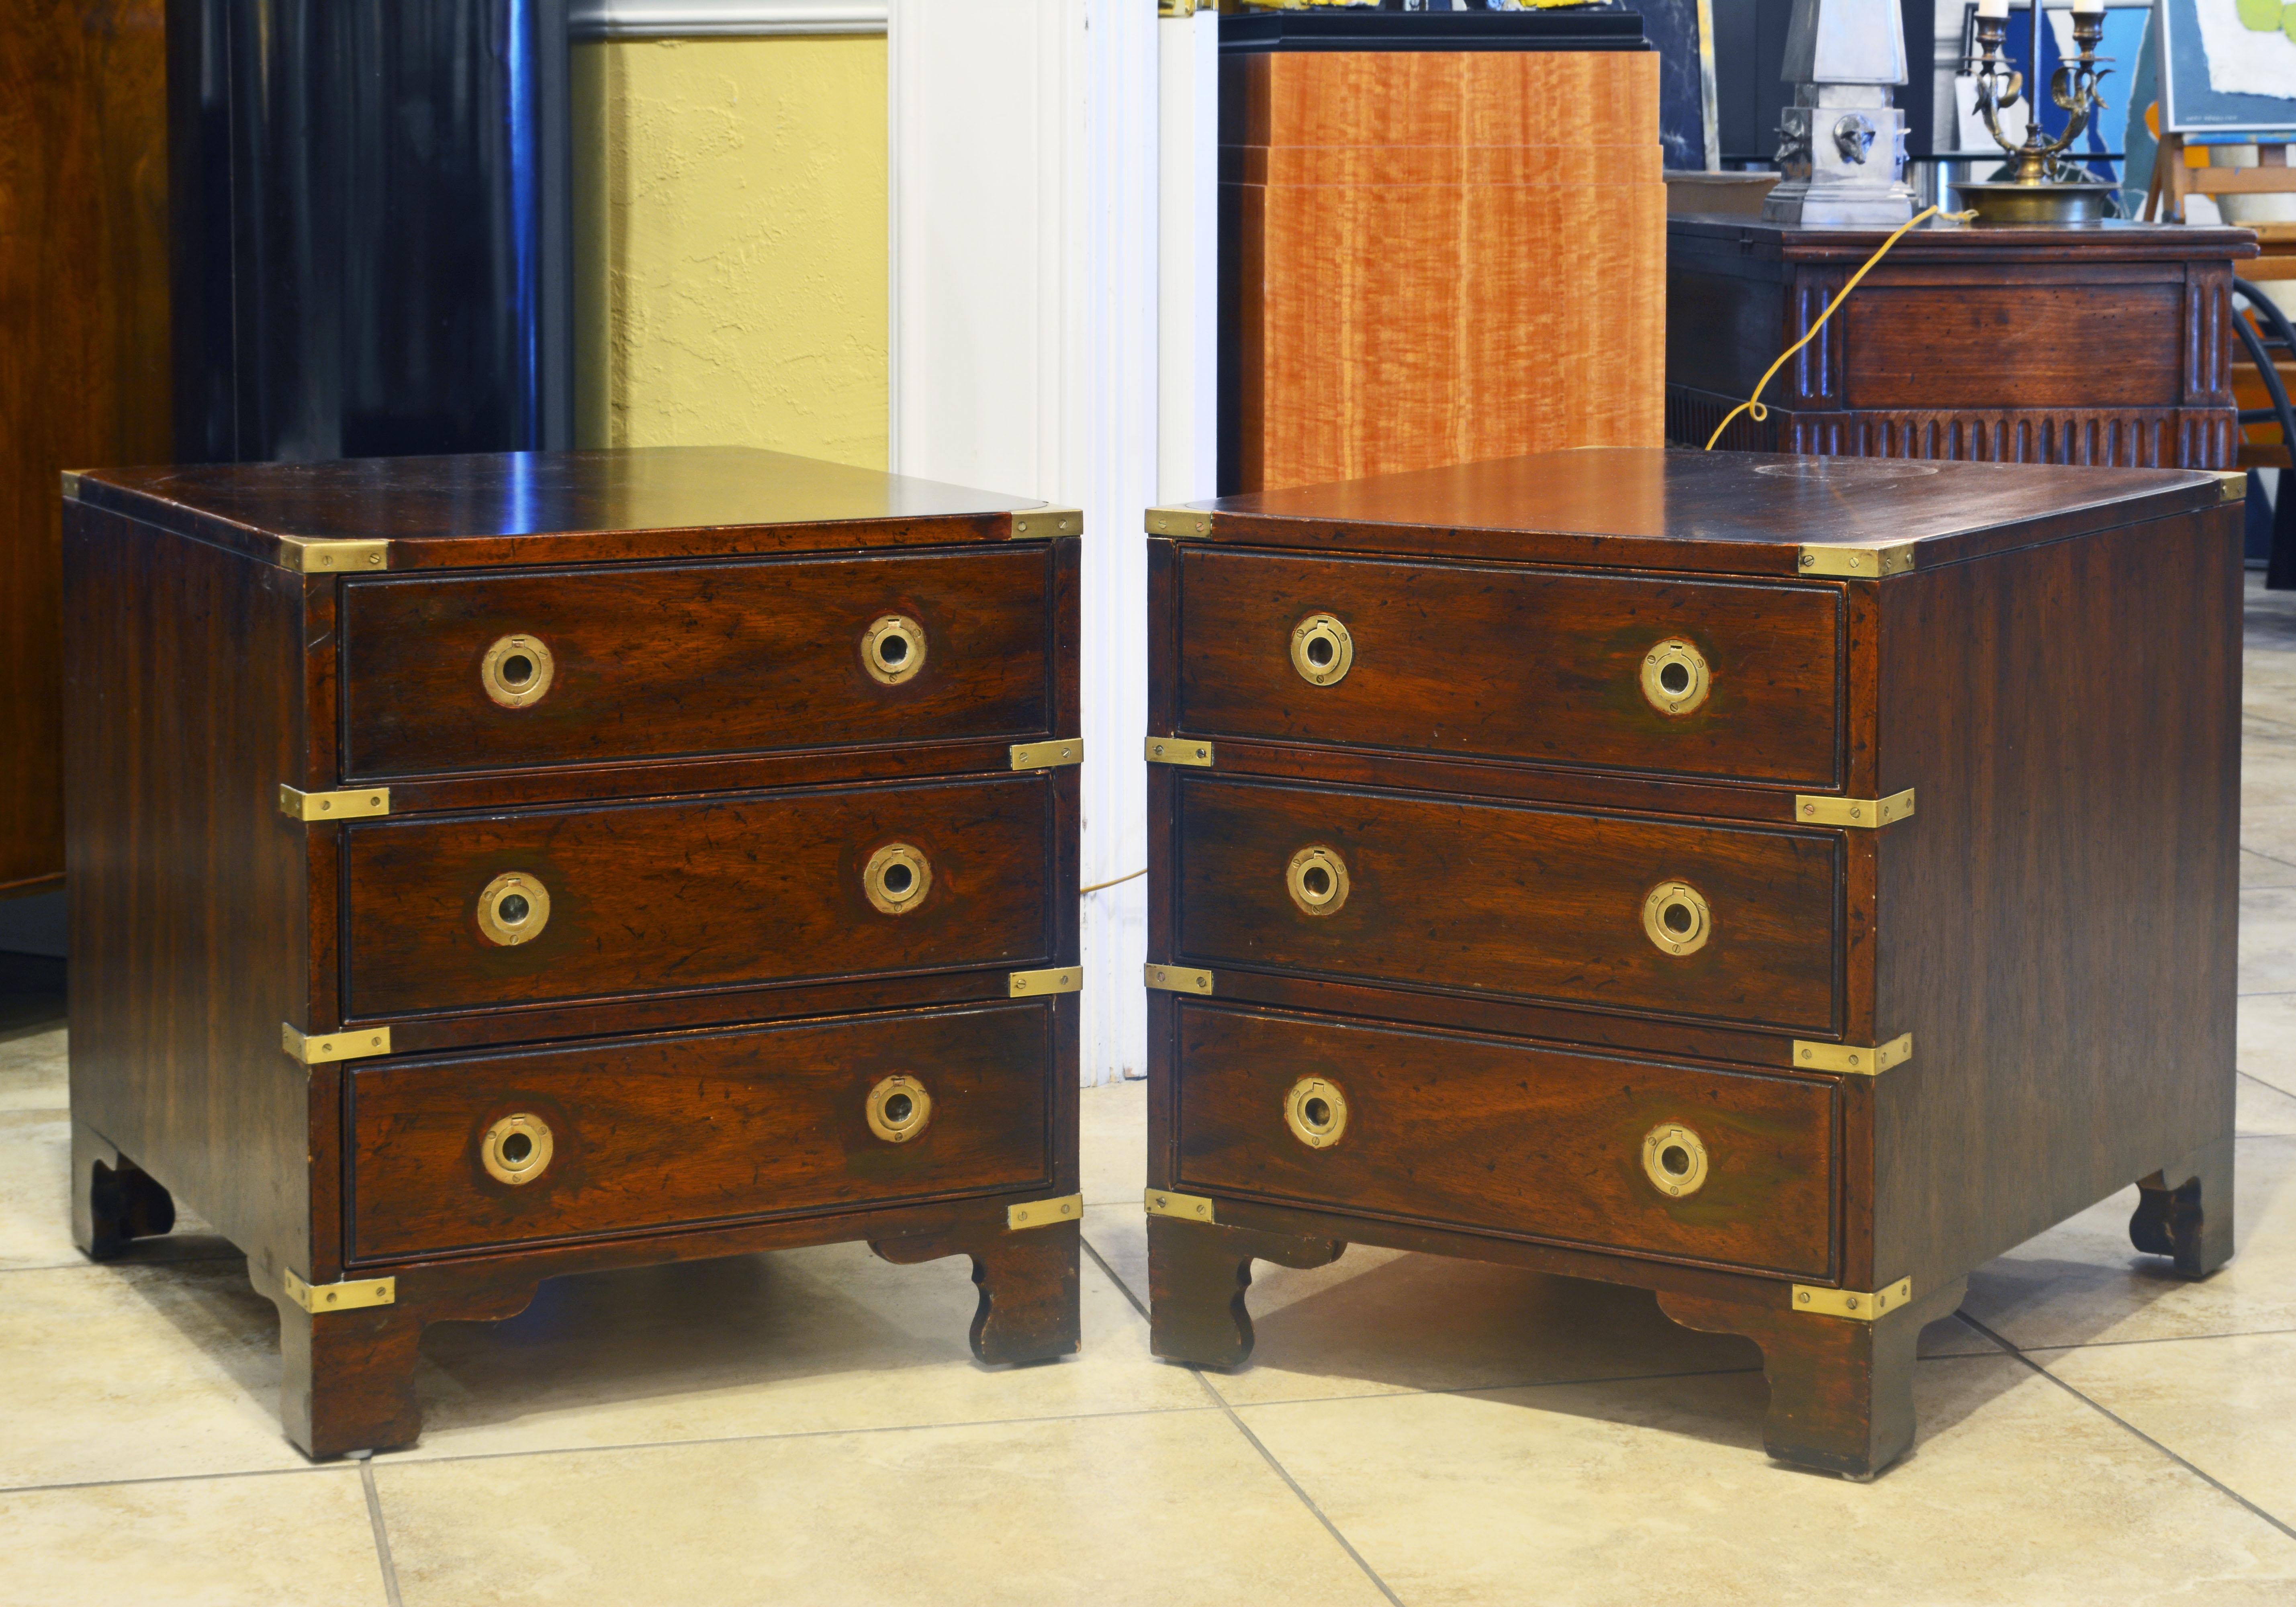 Dating to circa 1970 this pair of small Campaign style chest of drawers are great as either end tables or nightstands. The wood has a deep warm color contrasting well to the polished brass mounts. They are branded 'Heritage'.